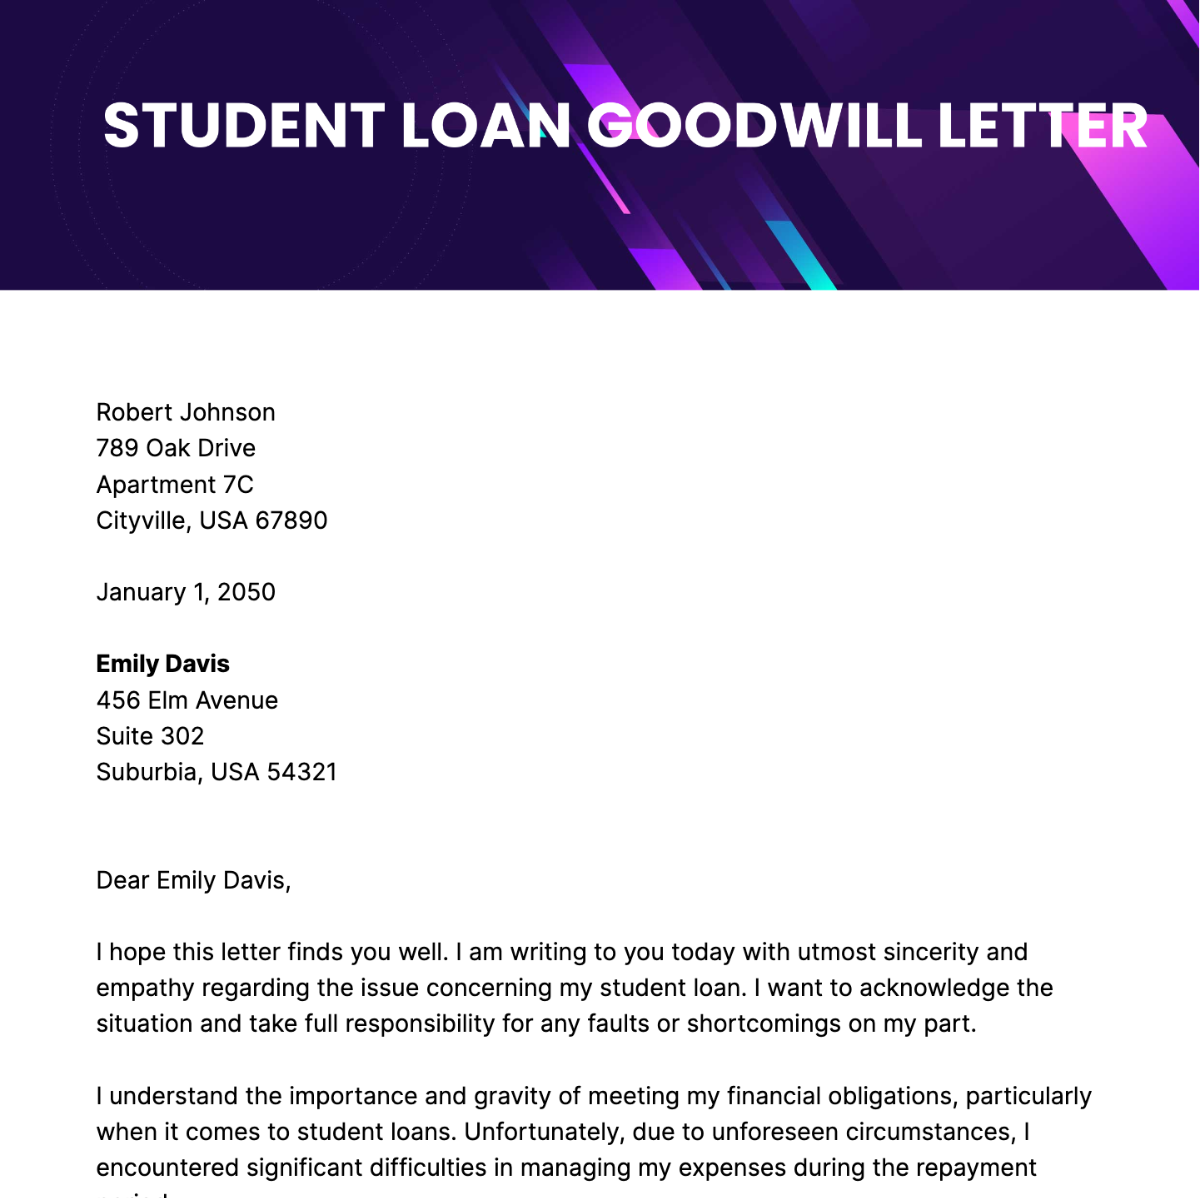 Student Loan Goodwill Letter Template